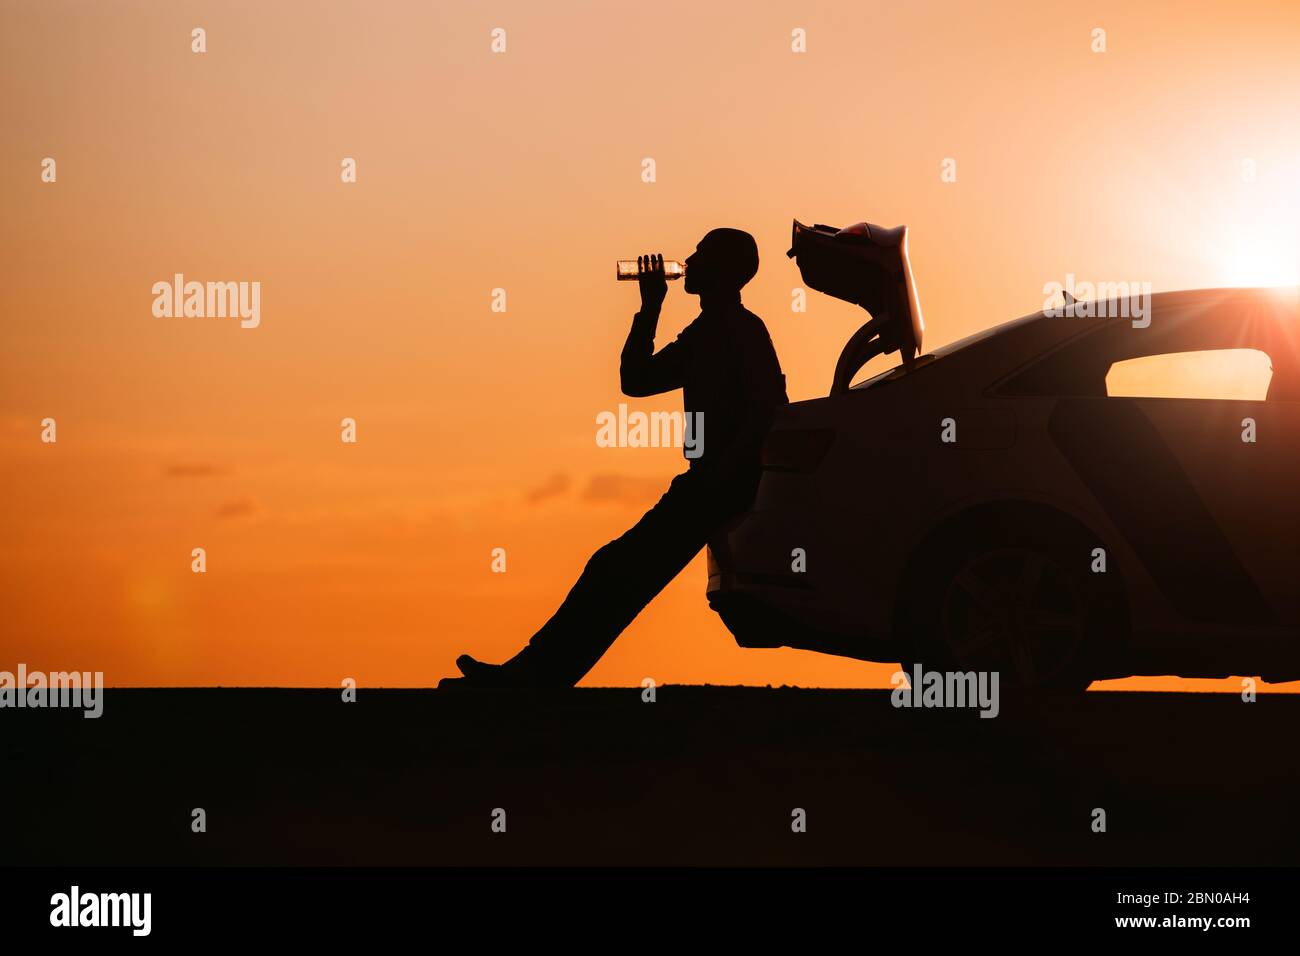 Silhouette of man driver relaxing after a ride, sitting on the trunk of his car and drinking water from a bottle, side view. Sunset time. Stock Photo